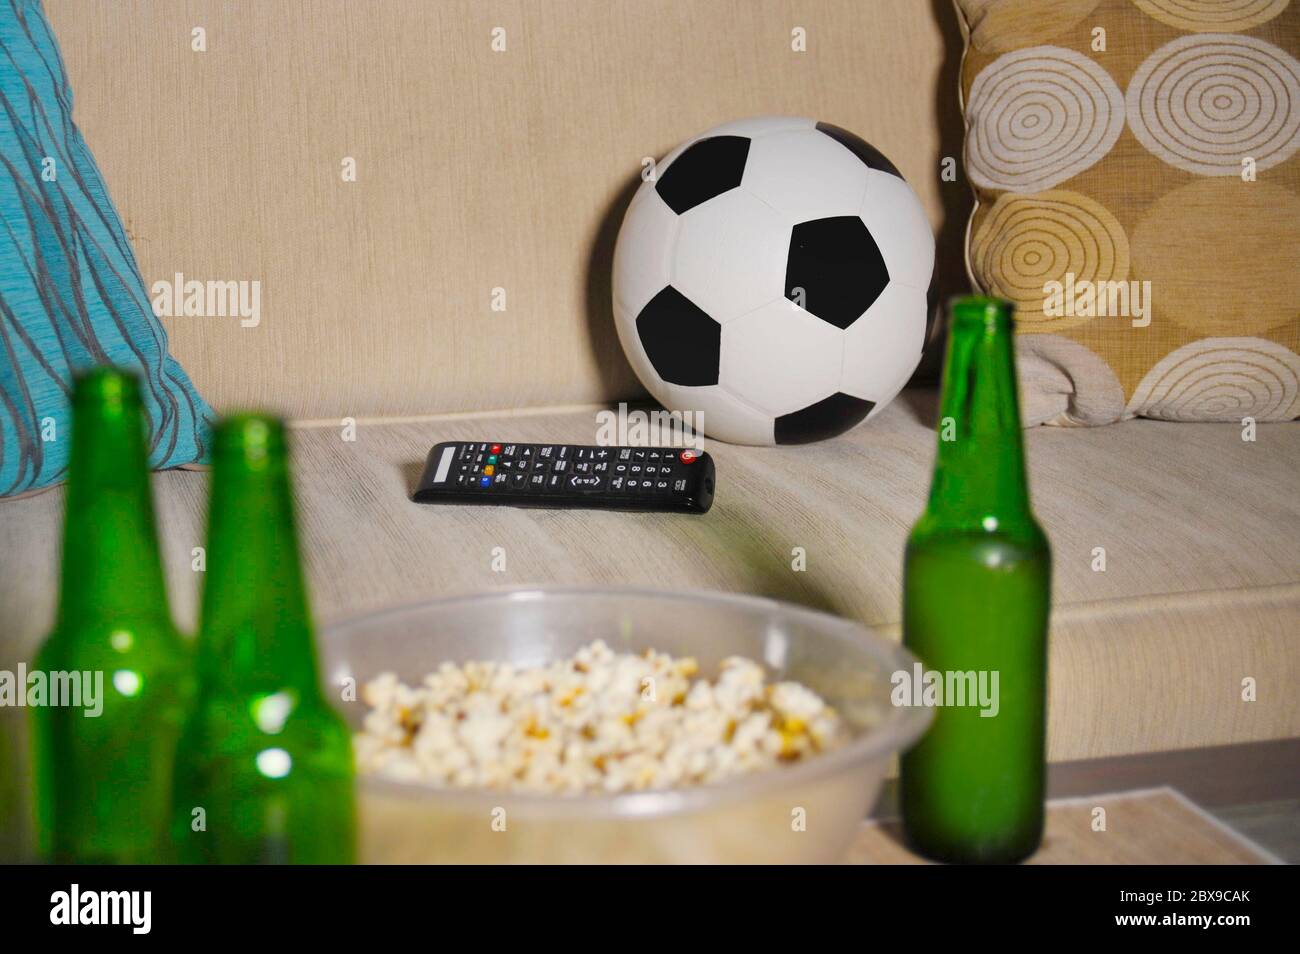 Conceptual Still Life No People About Watching Football Game In Television With Friends Featuring Soccer Ball And Remote Control Tv On Living Room Sof Stock Photo Alamy